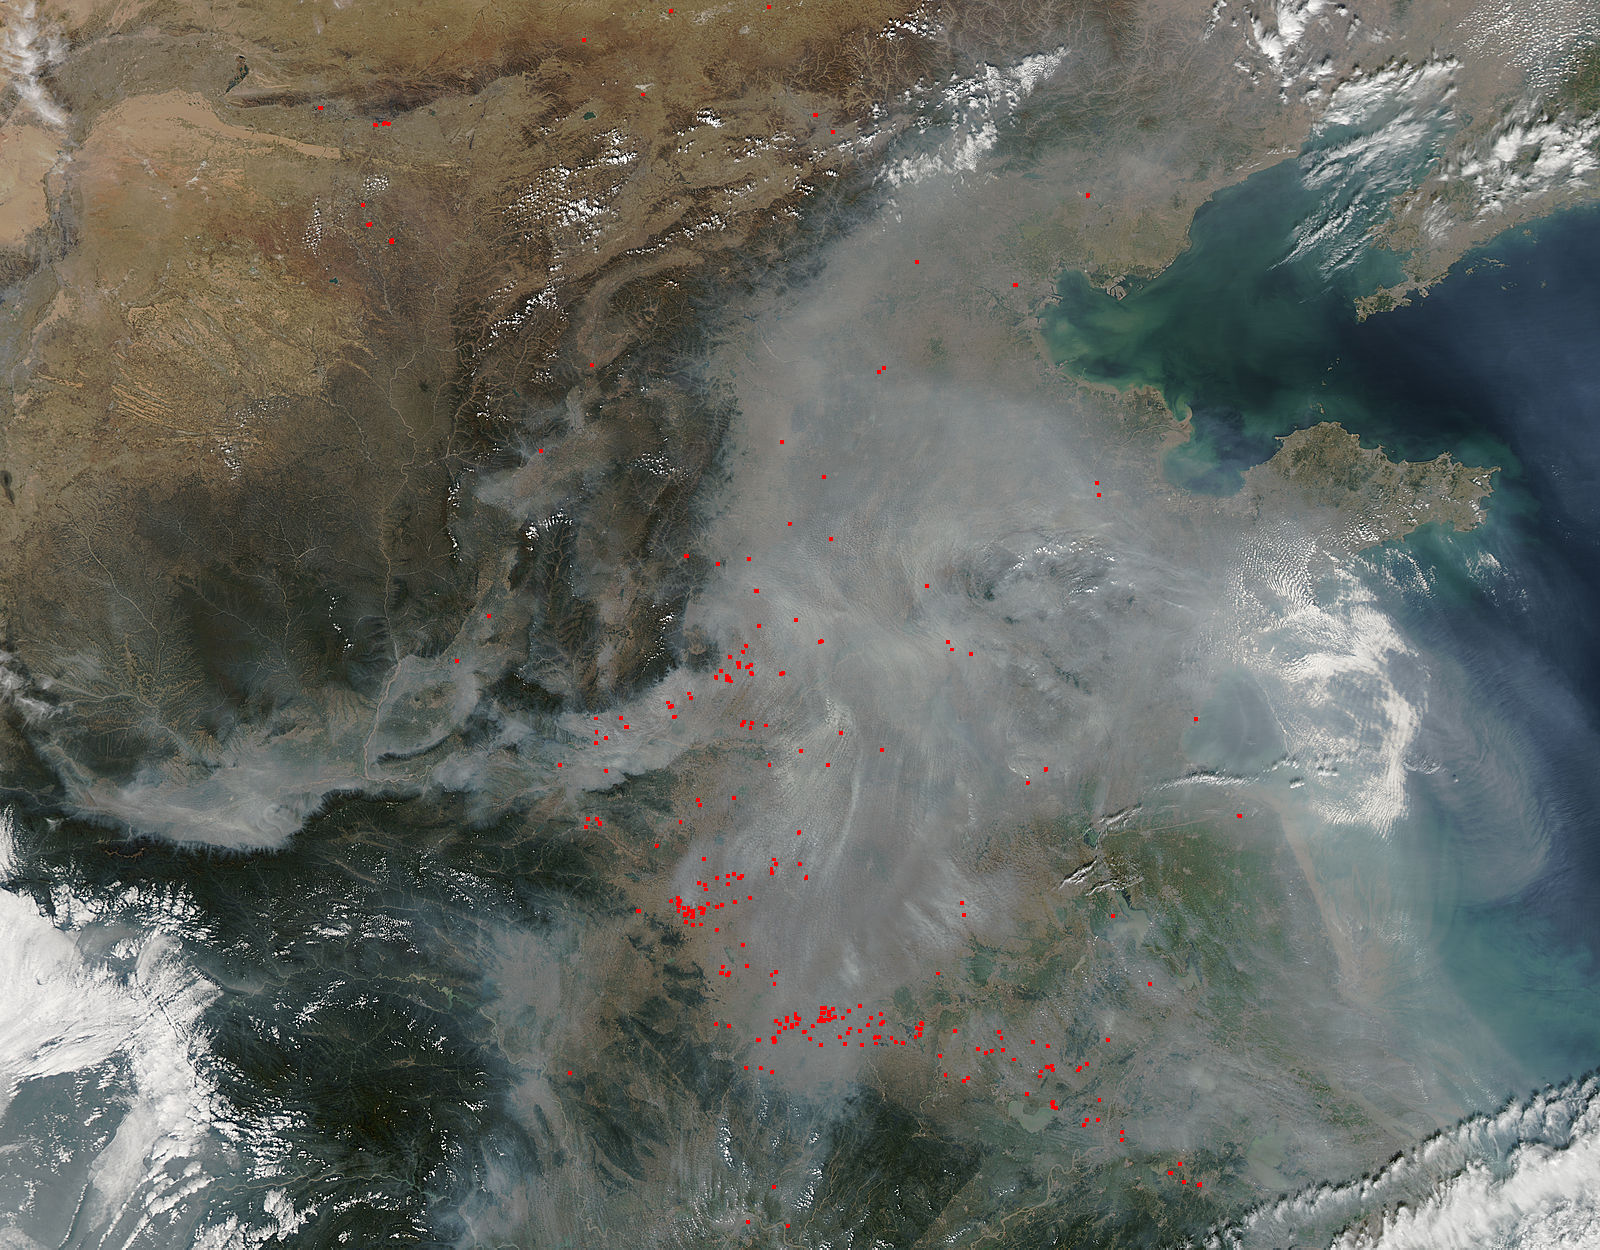 Agricultural fires polluted the air over eastern China